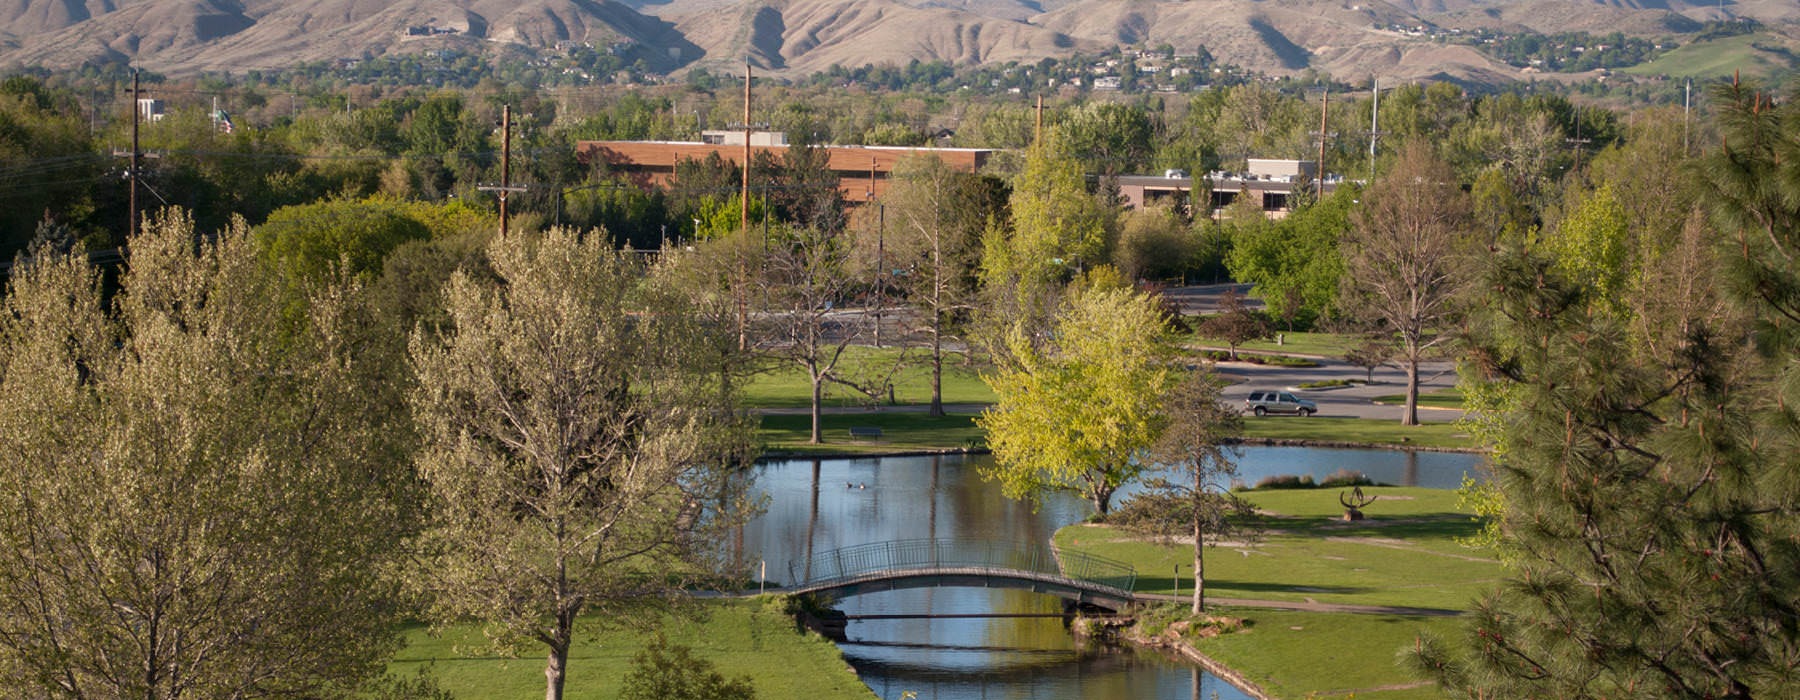 Boise park with lots of trees and greenery, river and bridge